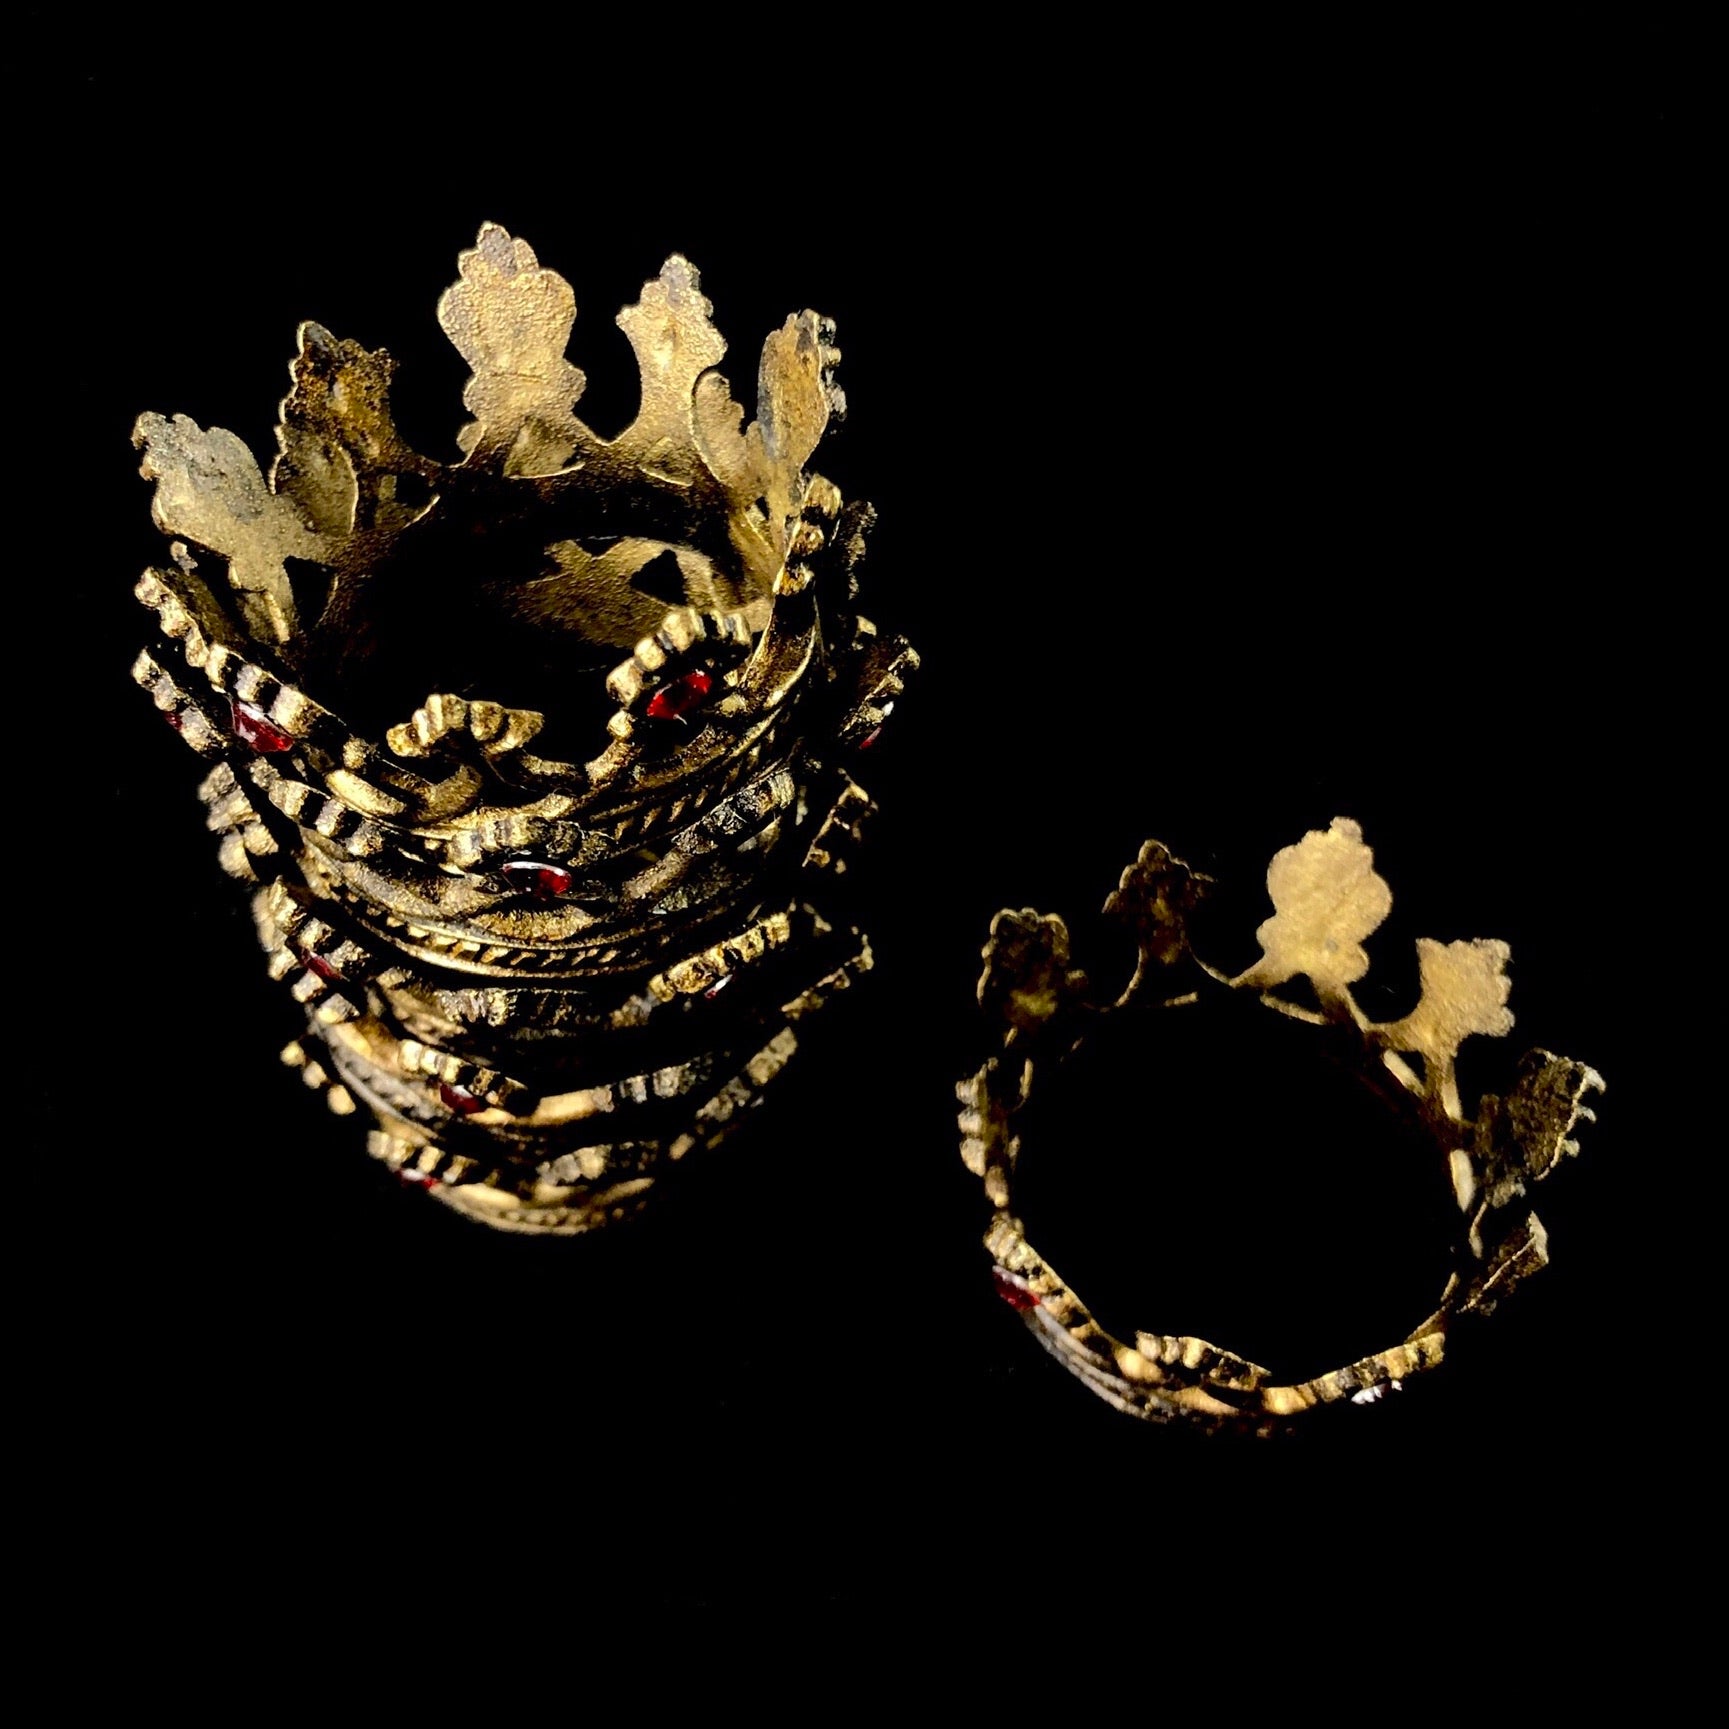 Top view of Mini Crowns